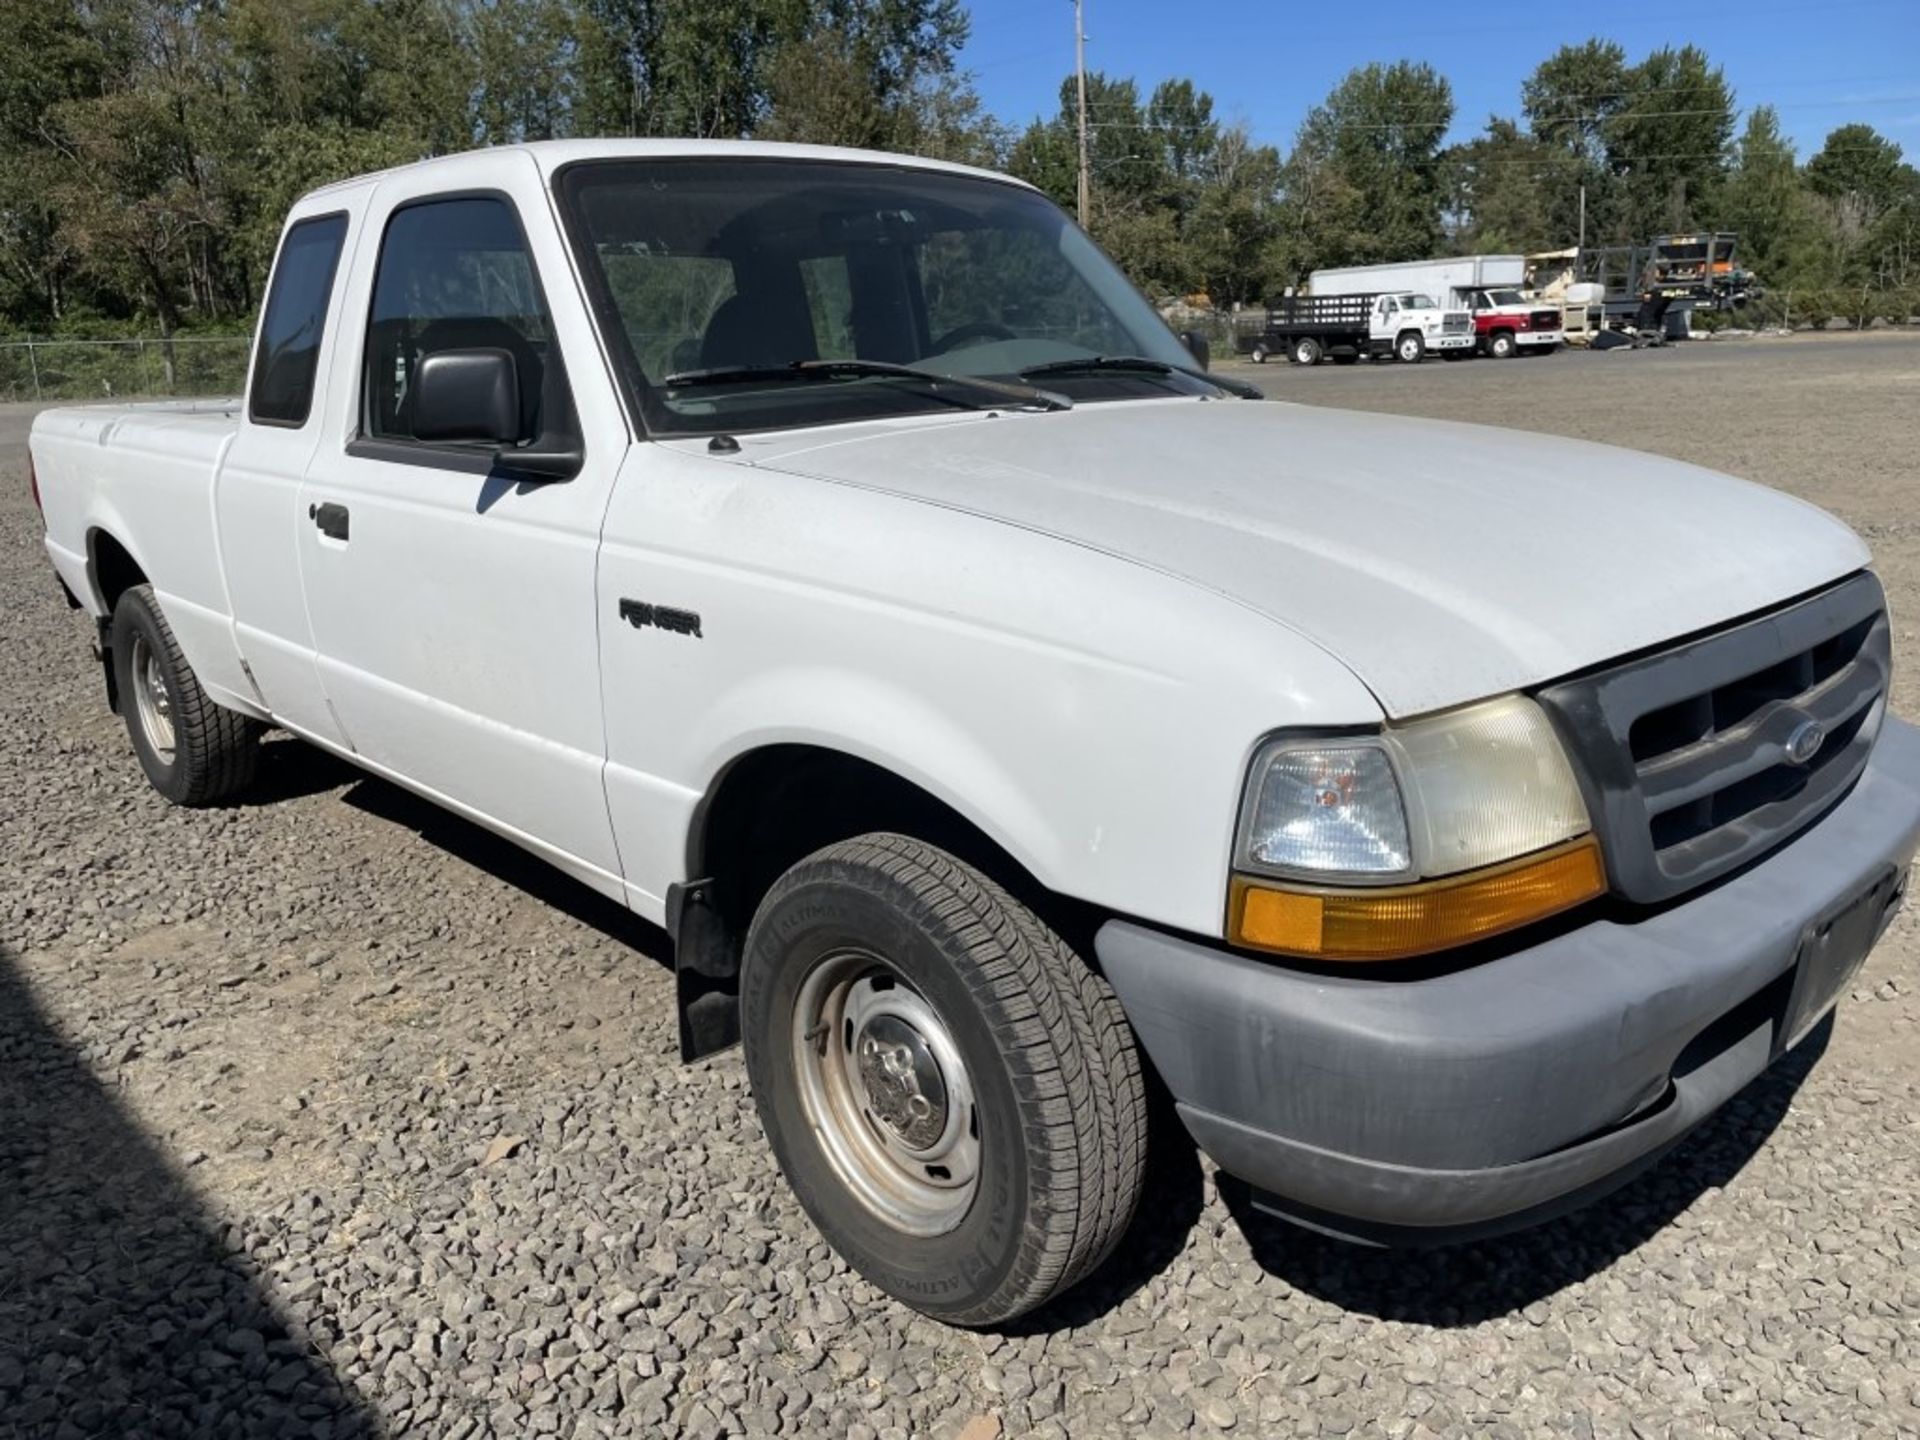 1999 Ford Ranger Extra Cab Pickup - Image 2 of 12